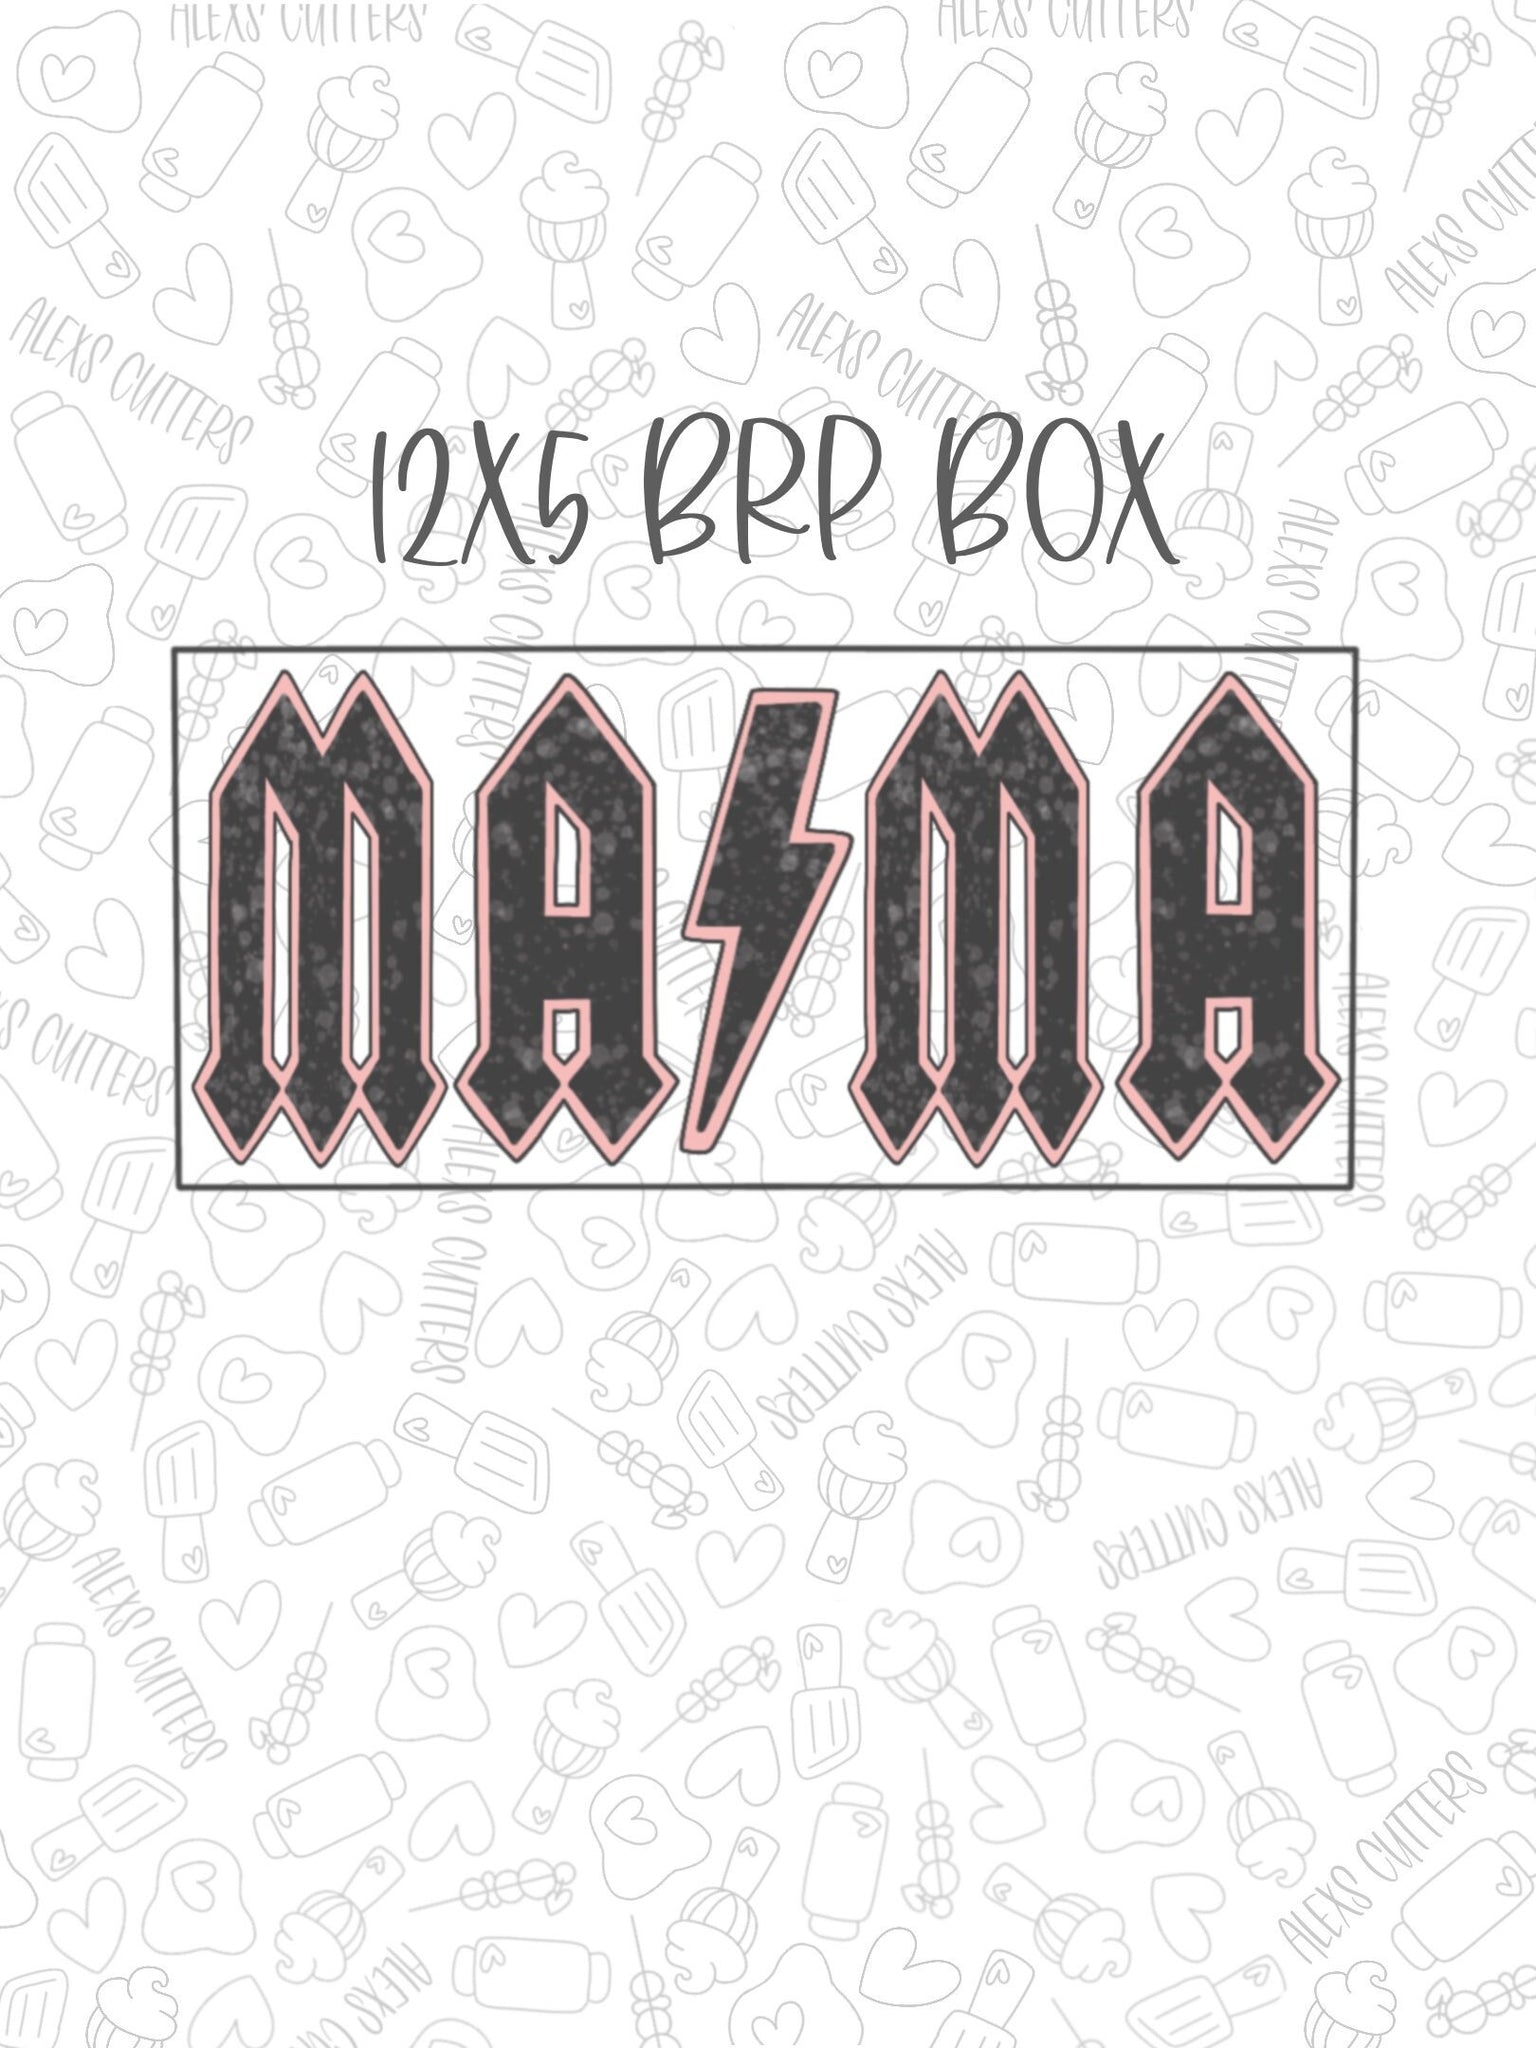 Rock Mama Collection Fits in 12x5 BRP Box